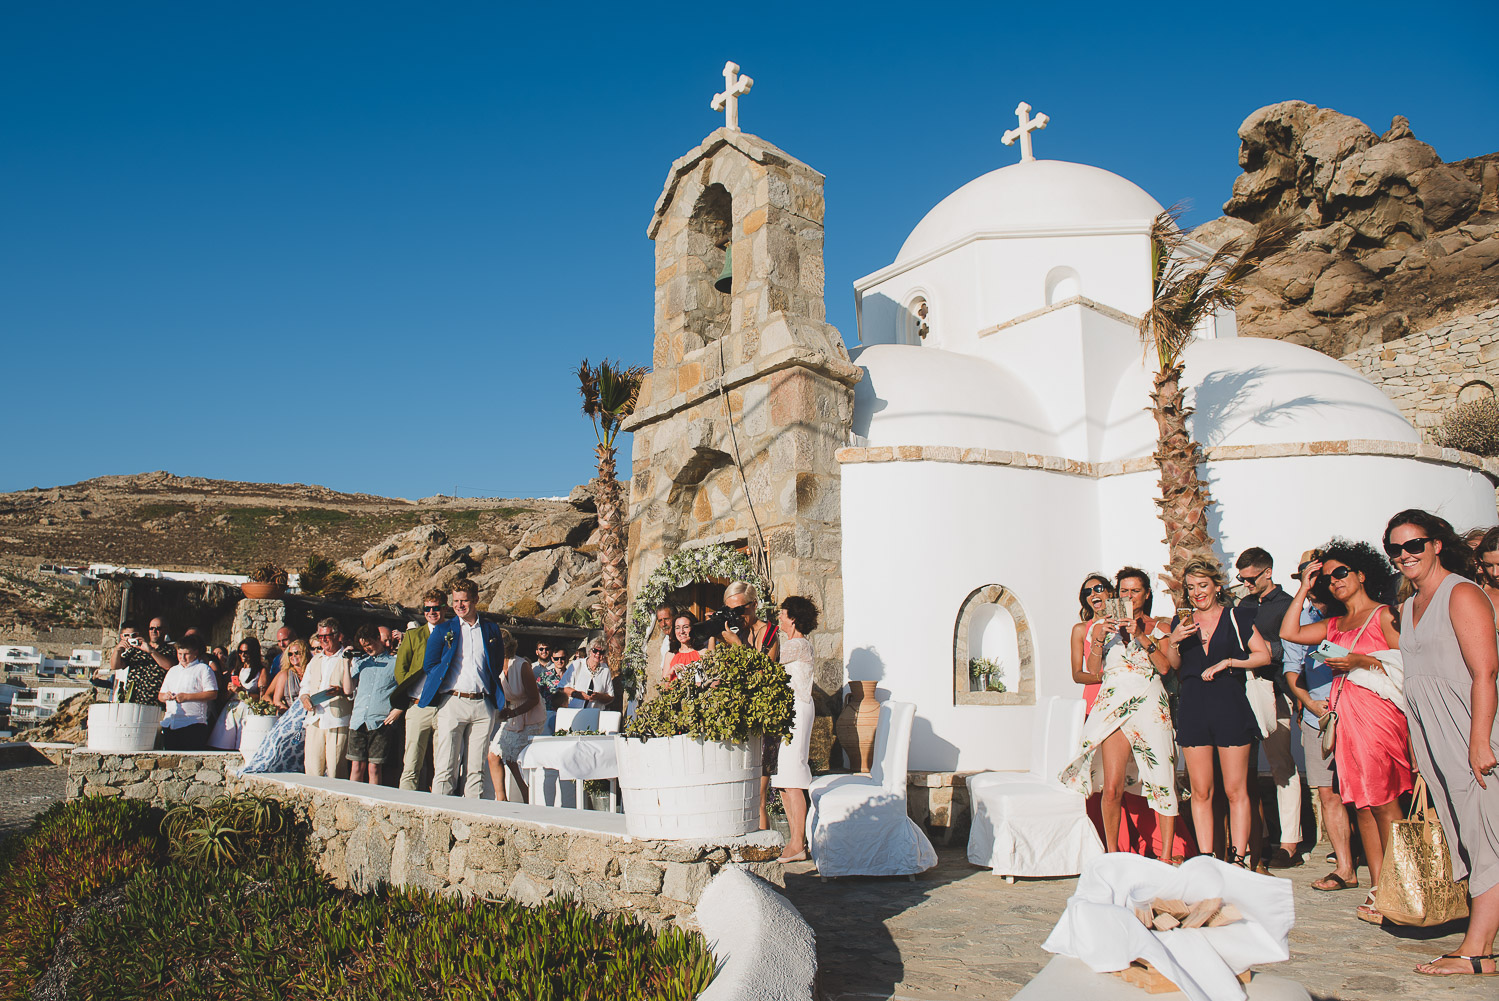 Wedding photographer Mykonos: guests at church waiting for the bride for Mykonos wedding.